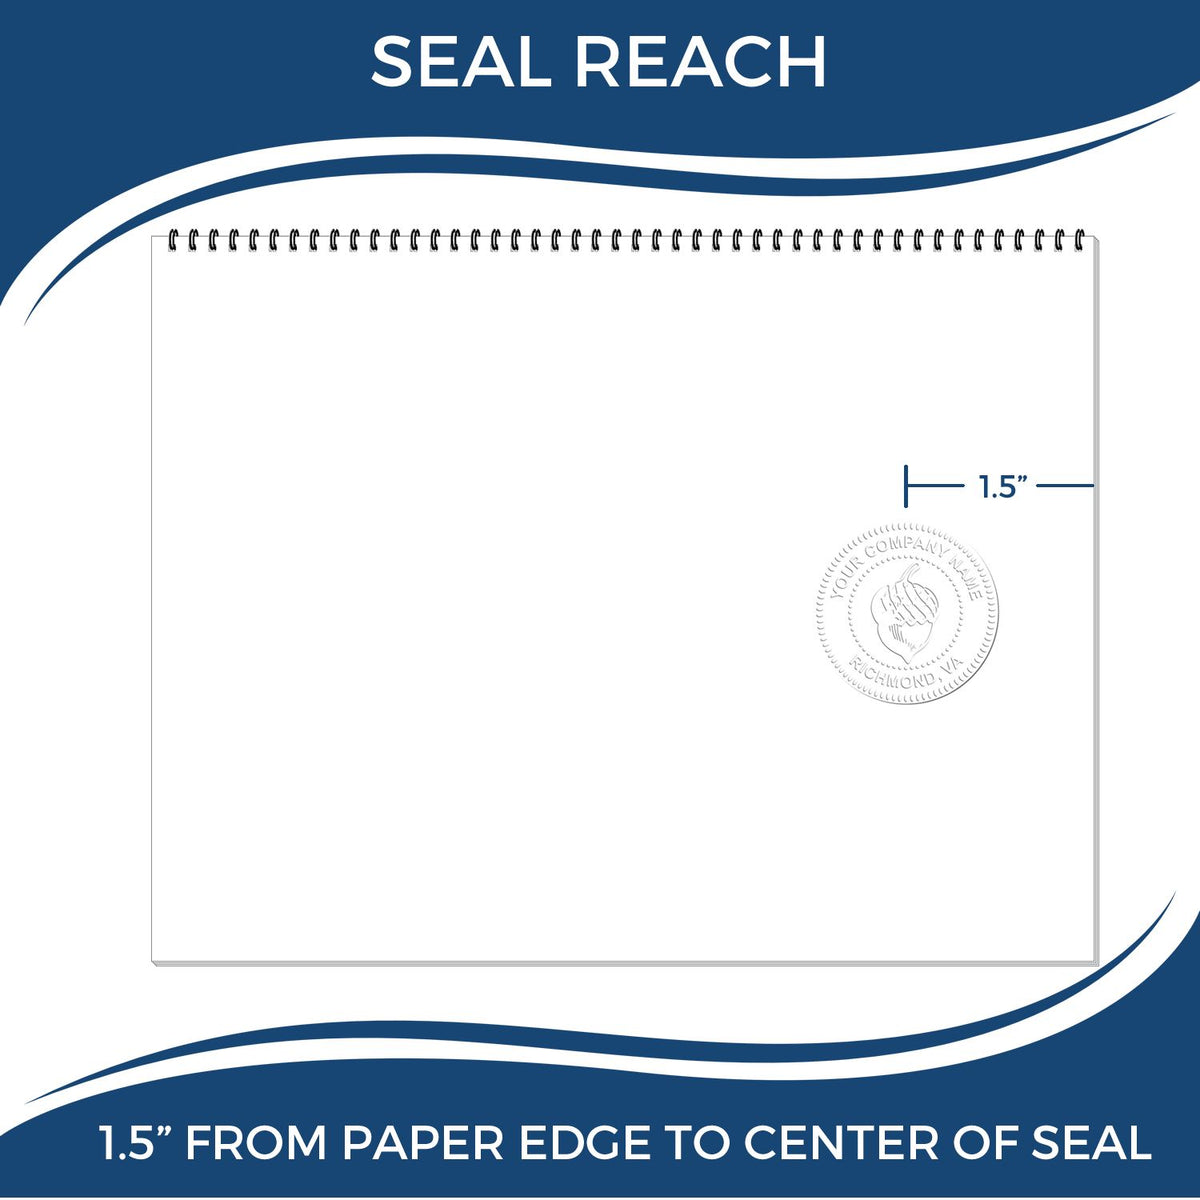 An infographic showing the seal reach which is represented by a ruler and a miniature seal image of the Hybrid North Carolina Engineer Seal